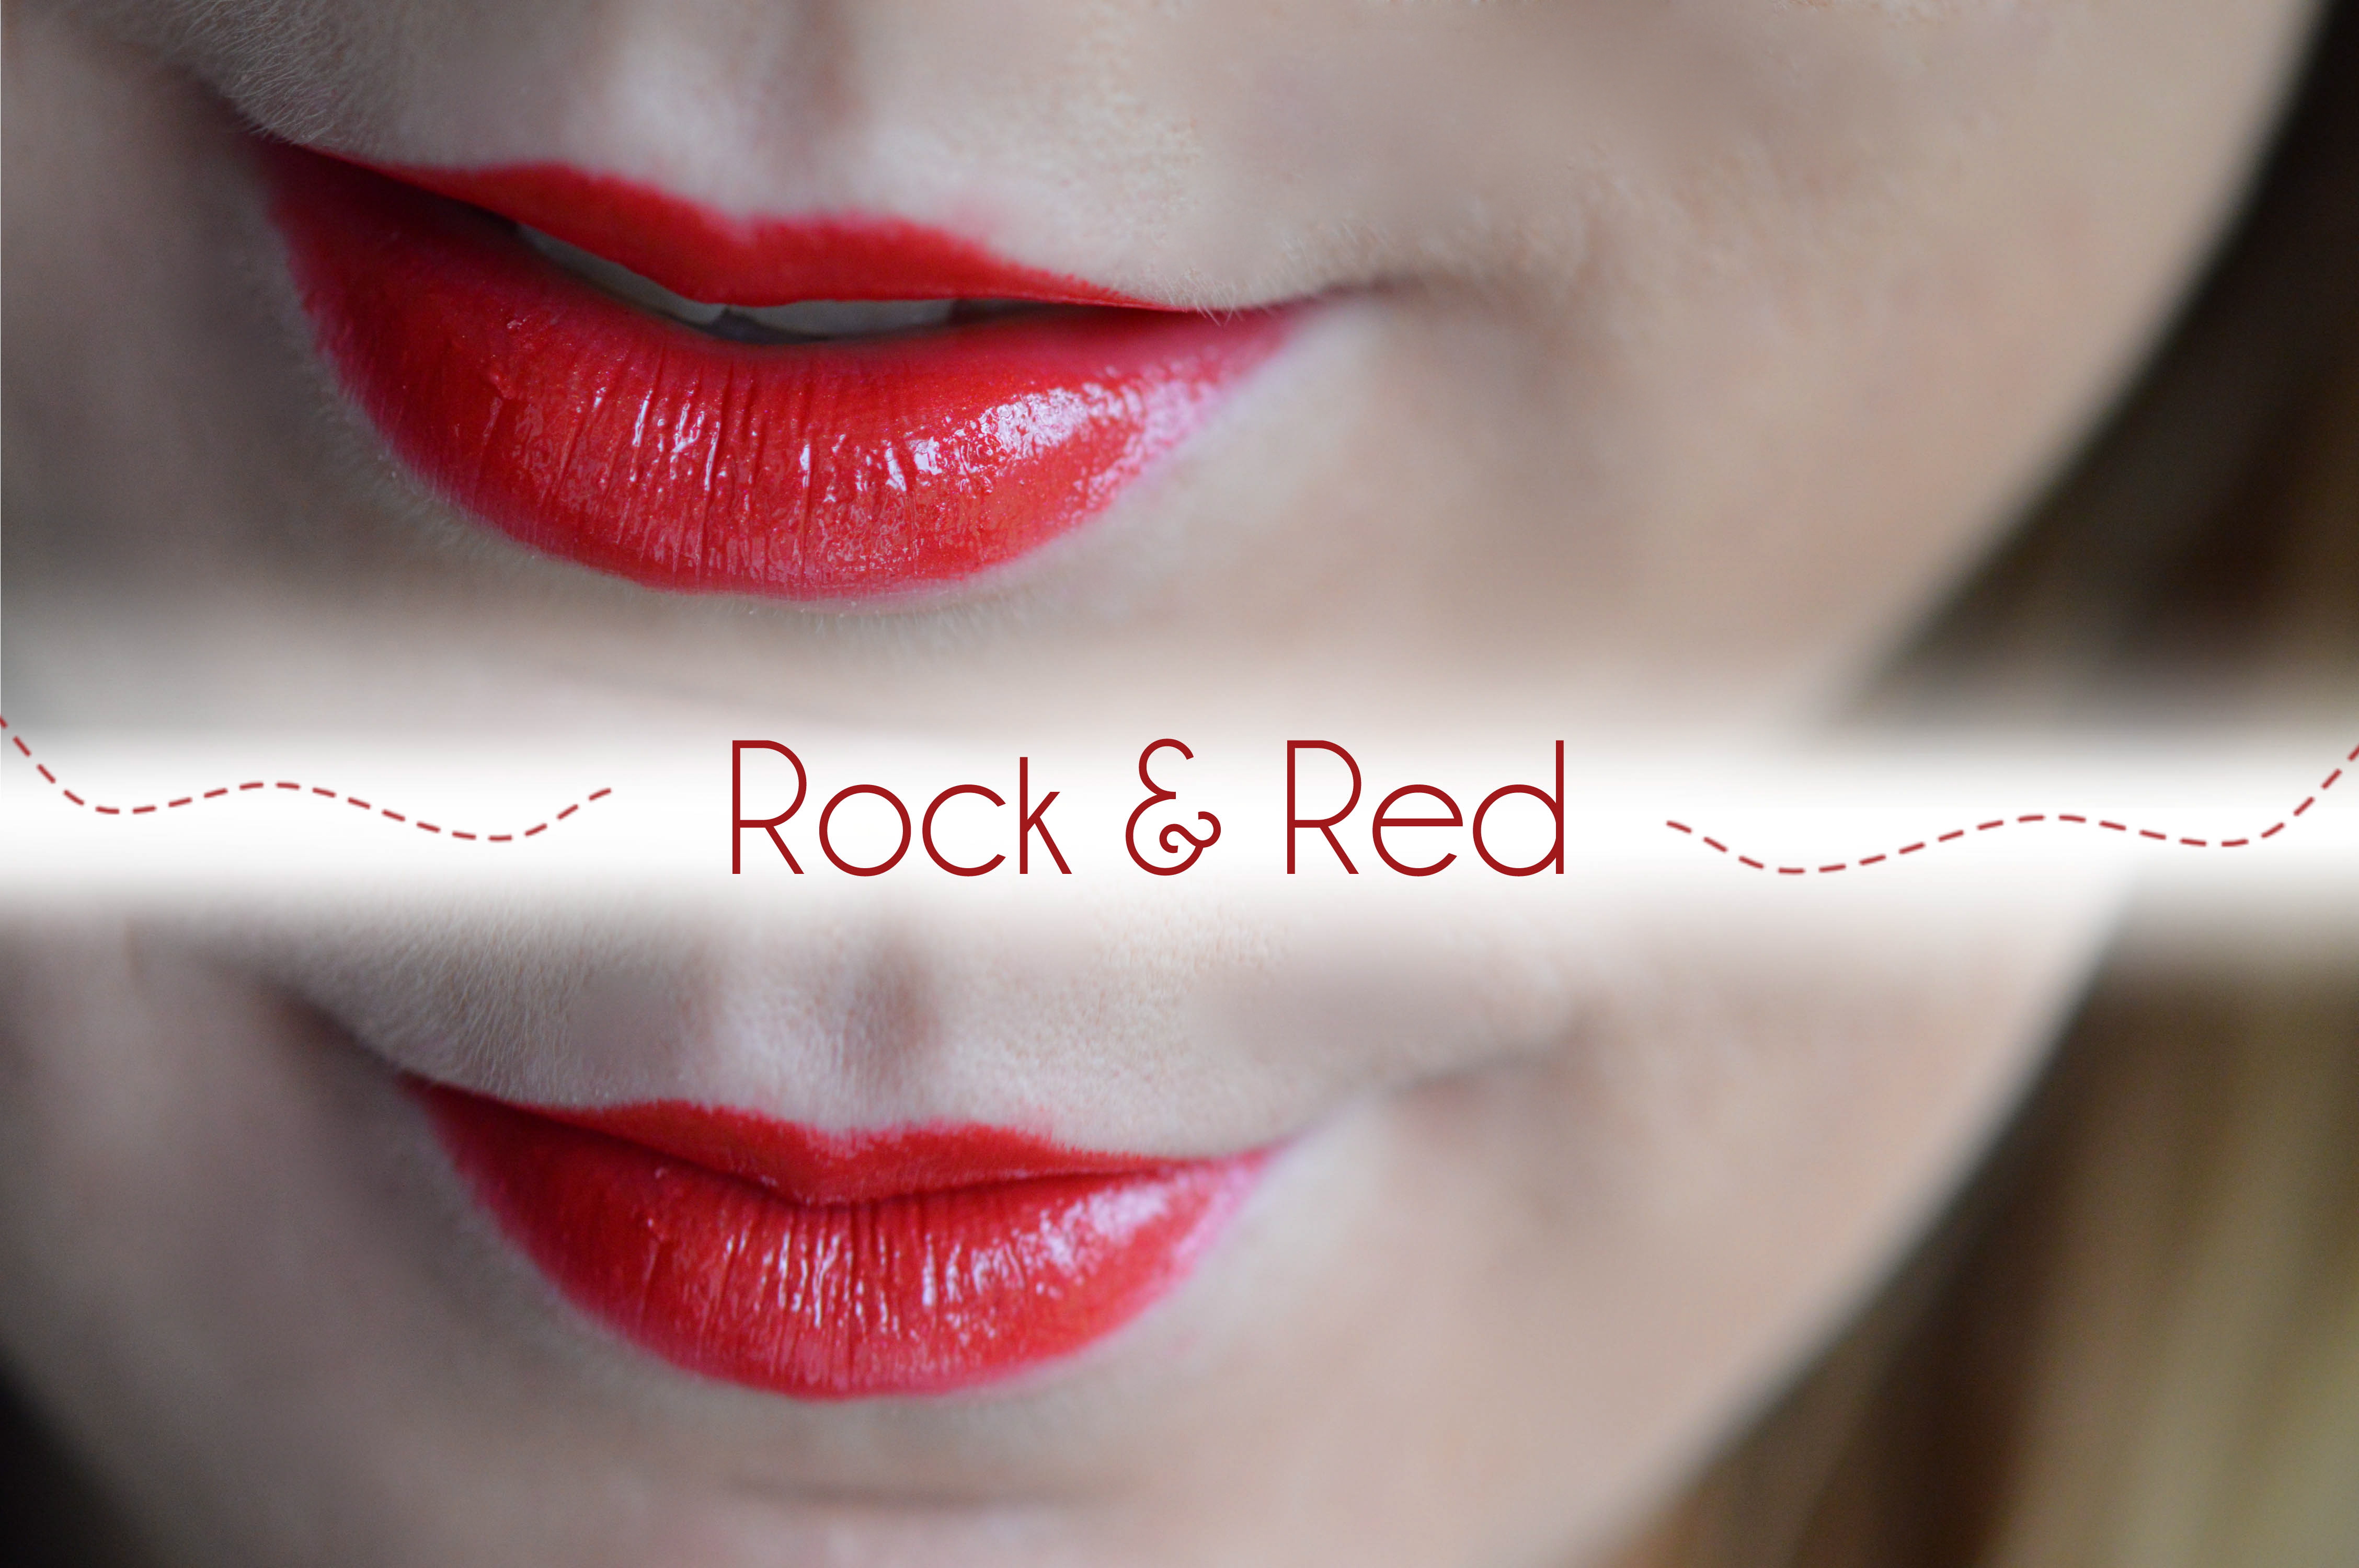 ALITTLEB_BLOG_BEAUTE_RESERVE_NATURELLE_LIP_AND_KISS_ROCK_AND_RED_SWACH